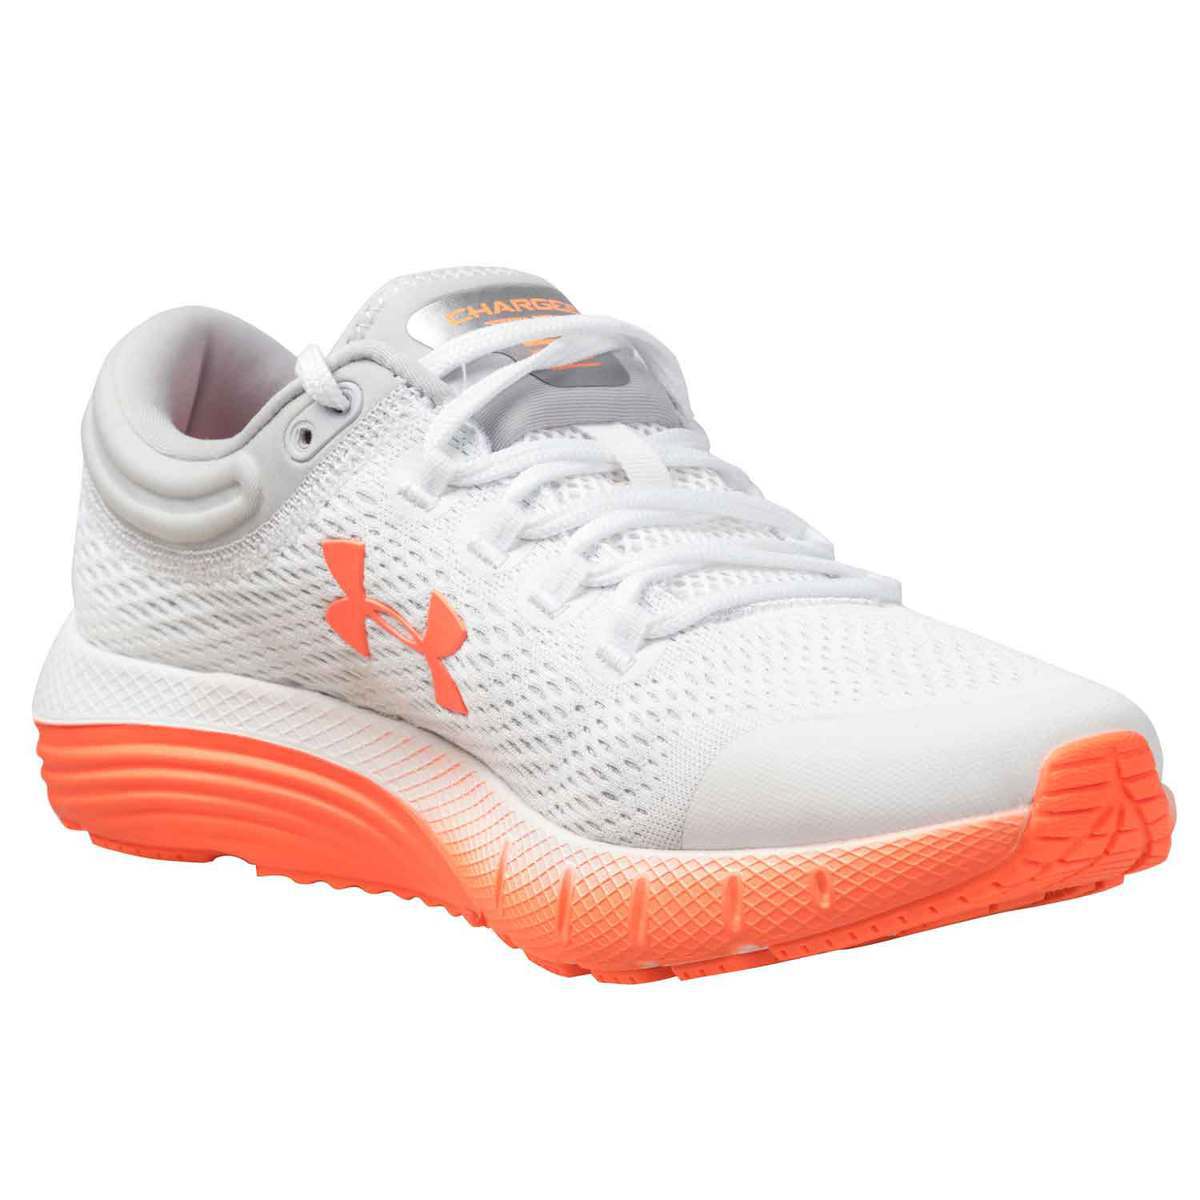 Under Armour Women's Charged Bandit 5 Running Shoes - White - Size - White 8.5 | Sportsman's Warehouse